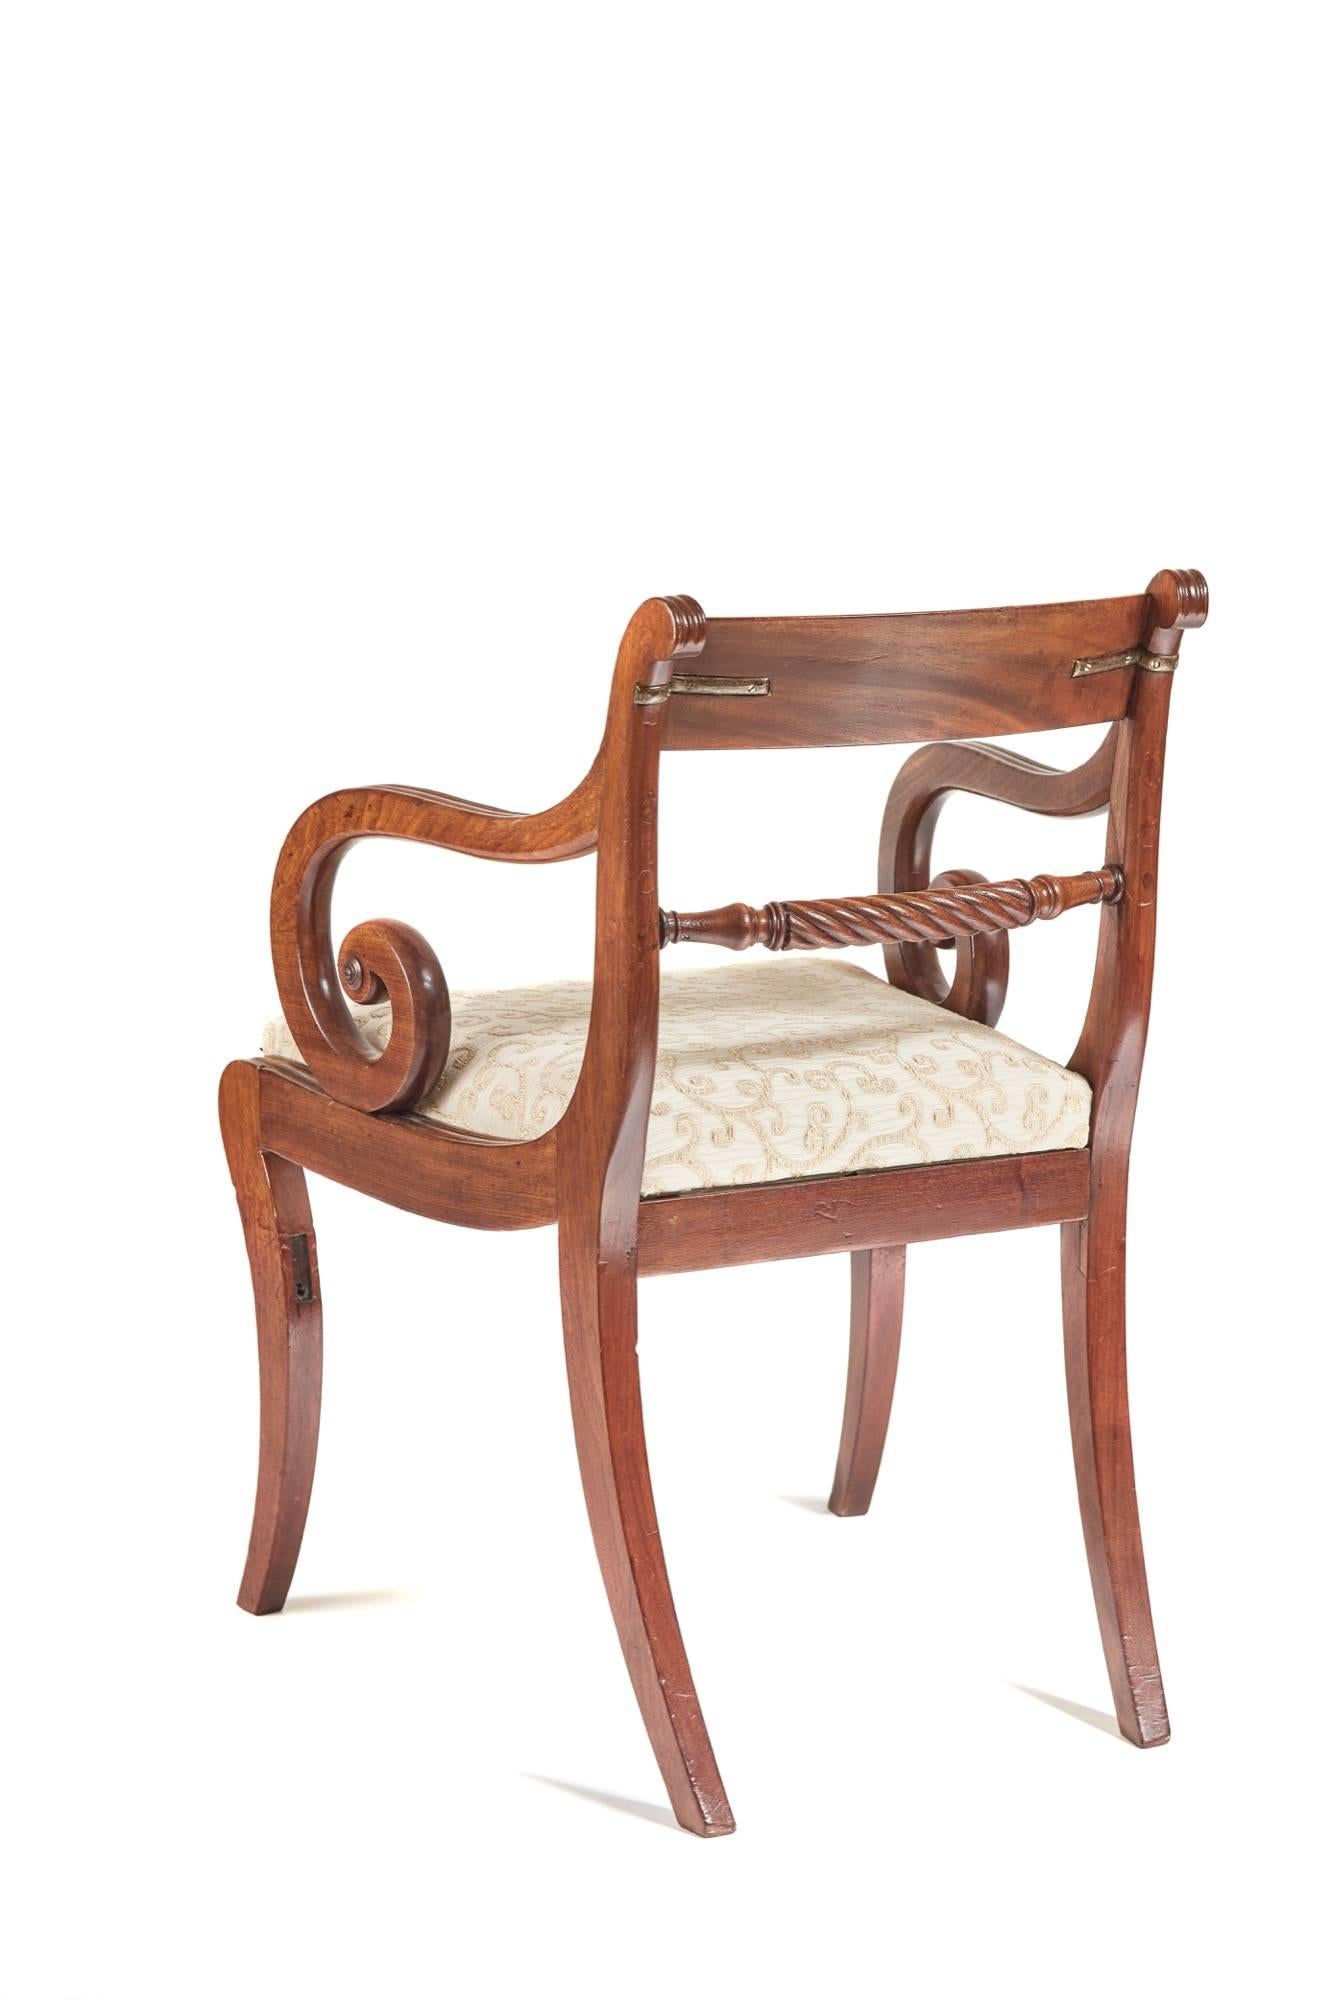 A Regency mahogany elbow chair, with a shaped reeded top rail, twisted rope centre splat, reeded scroll shaped arms, on reeded sabre front legs outswept back legs.

Very old repairs good color.